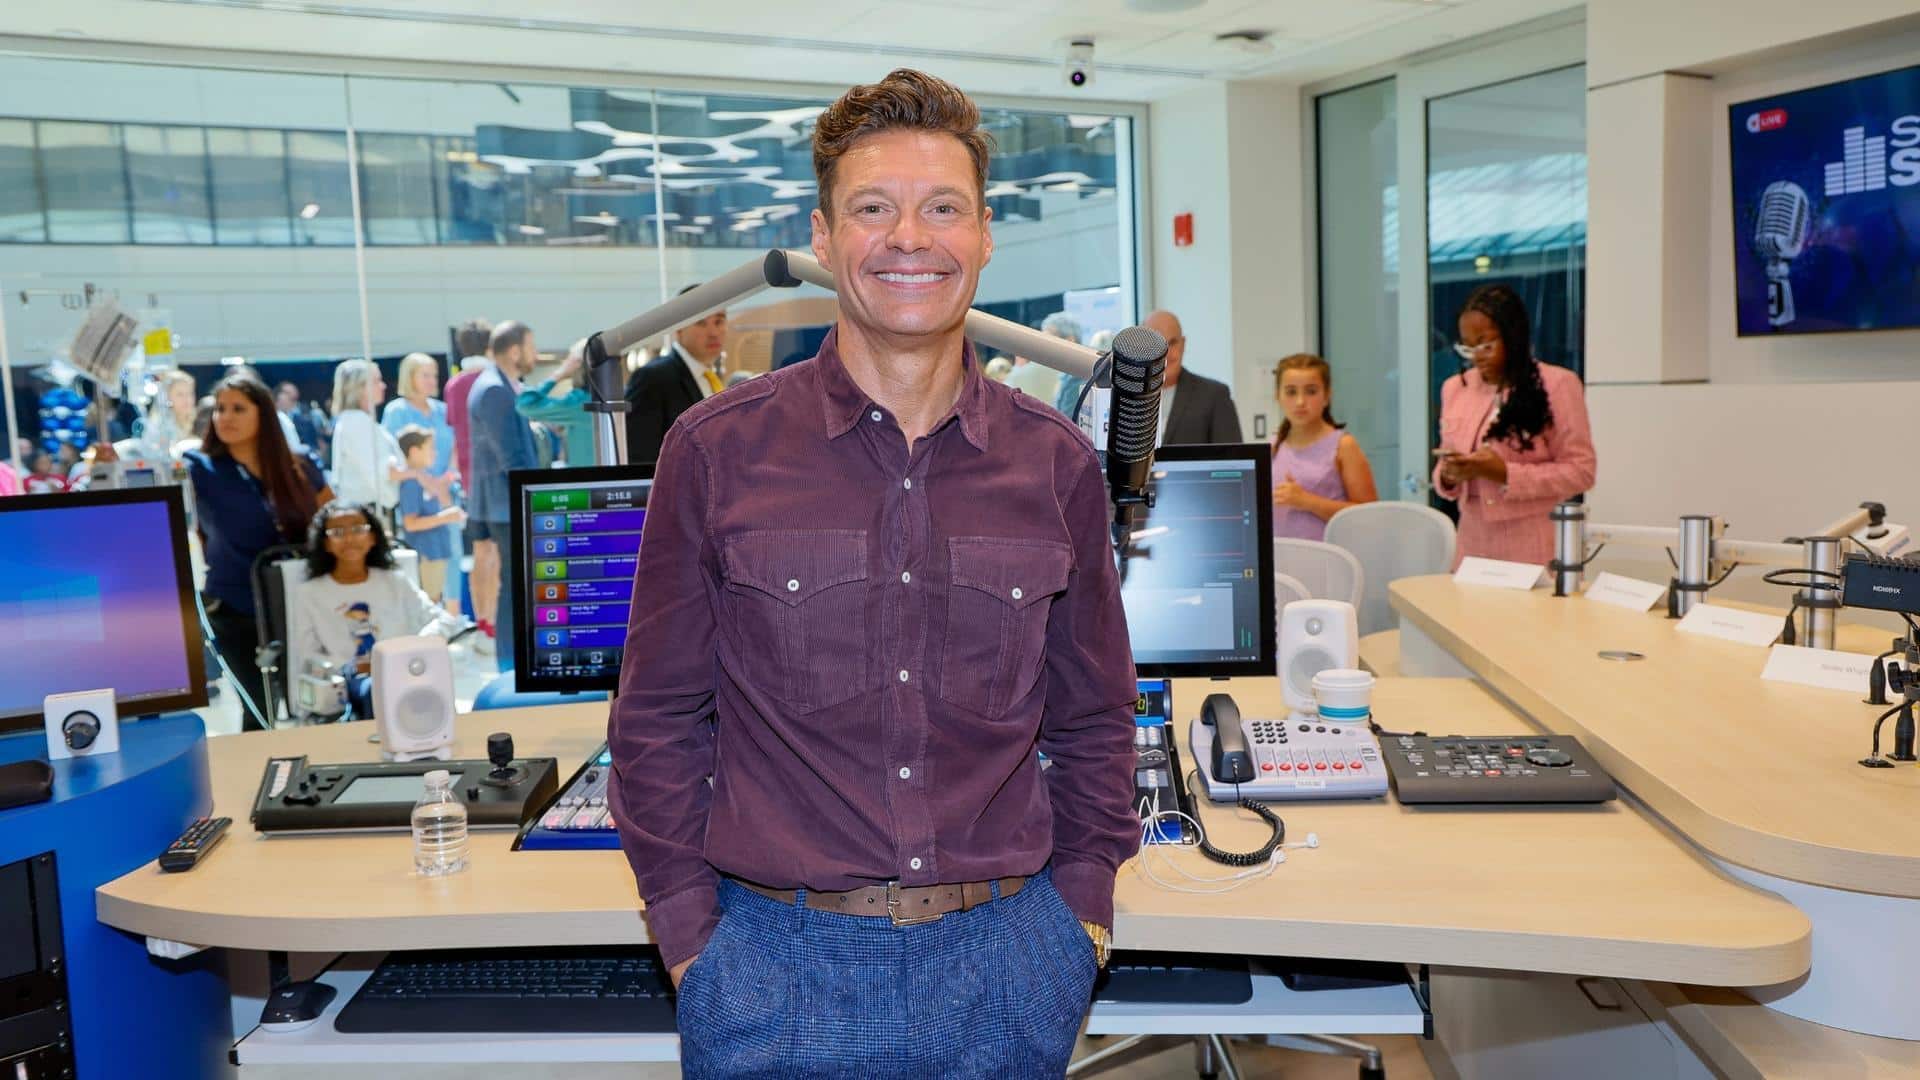 Ryan Seacrest with the Wheatstone VoxPro in Seacrest Studio at the Intermountain Primary Children's Hospital in Salt Lake City